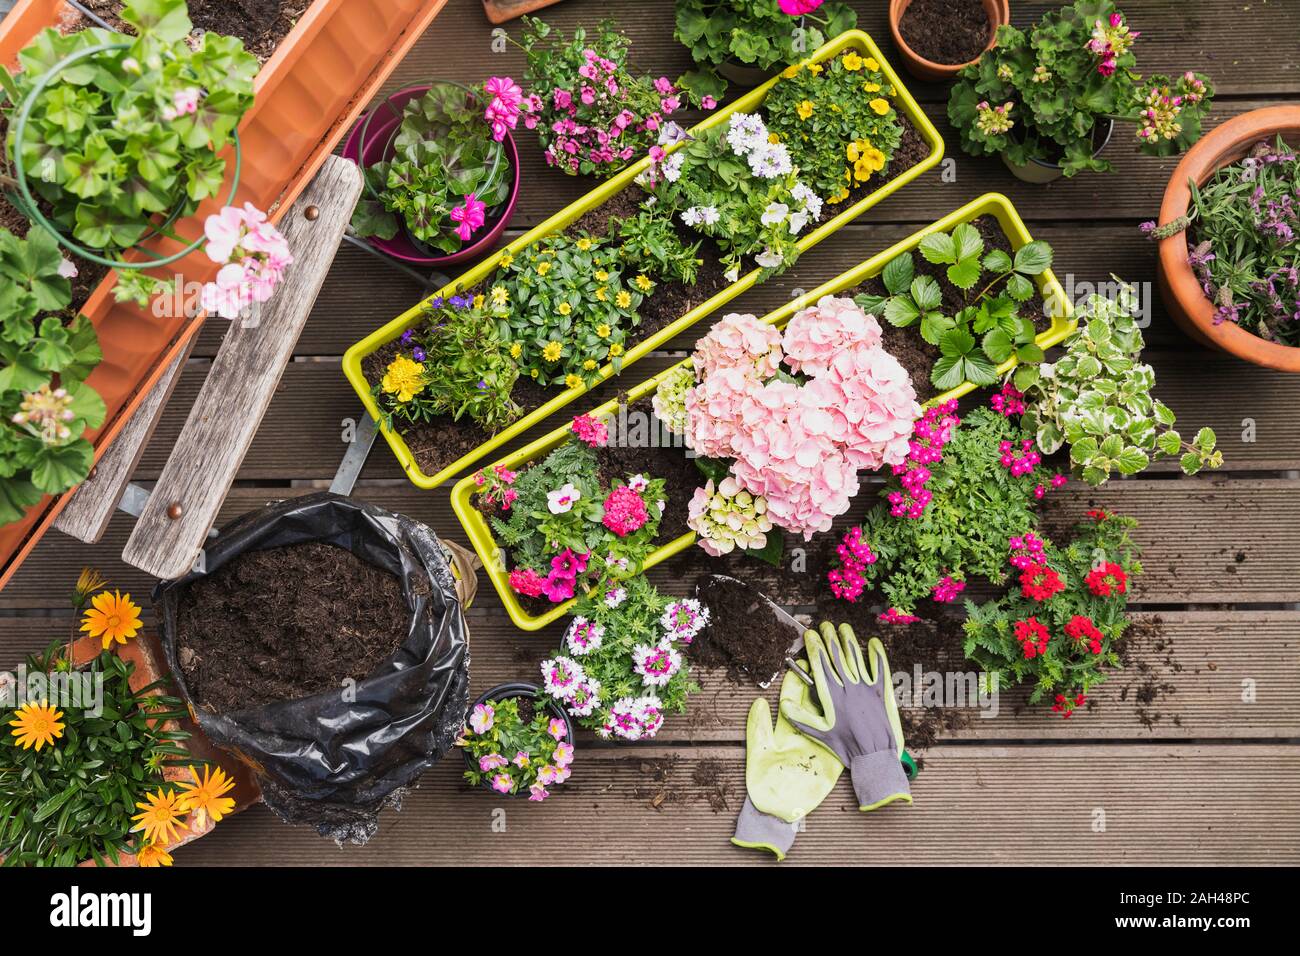 Colorful freshly potted summer flowers Stock Photo